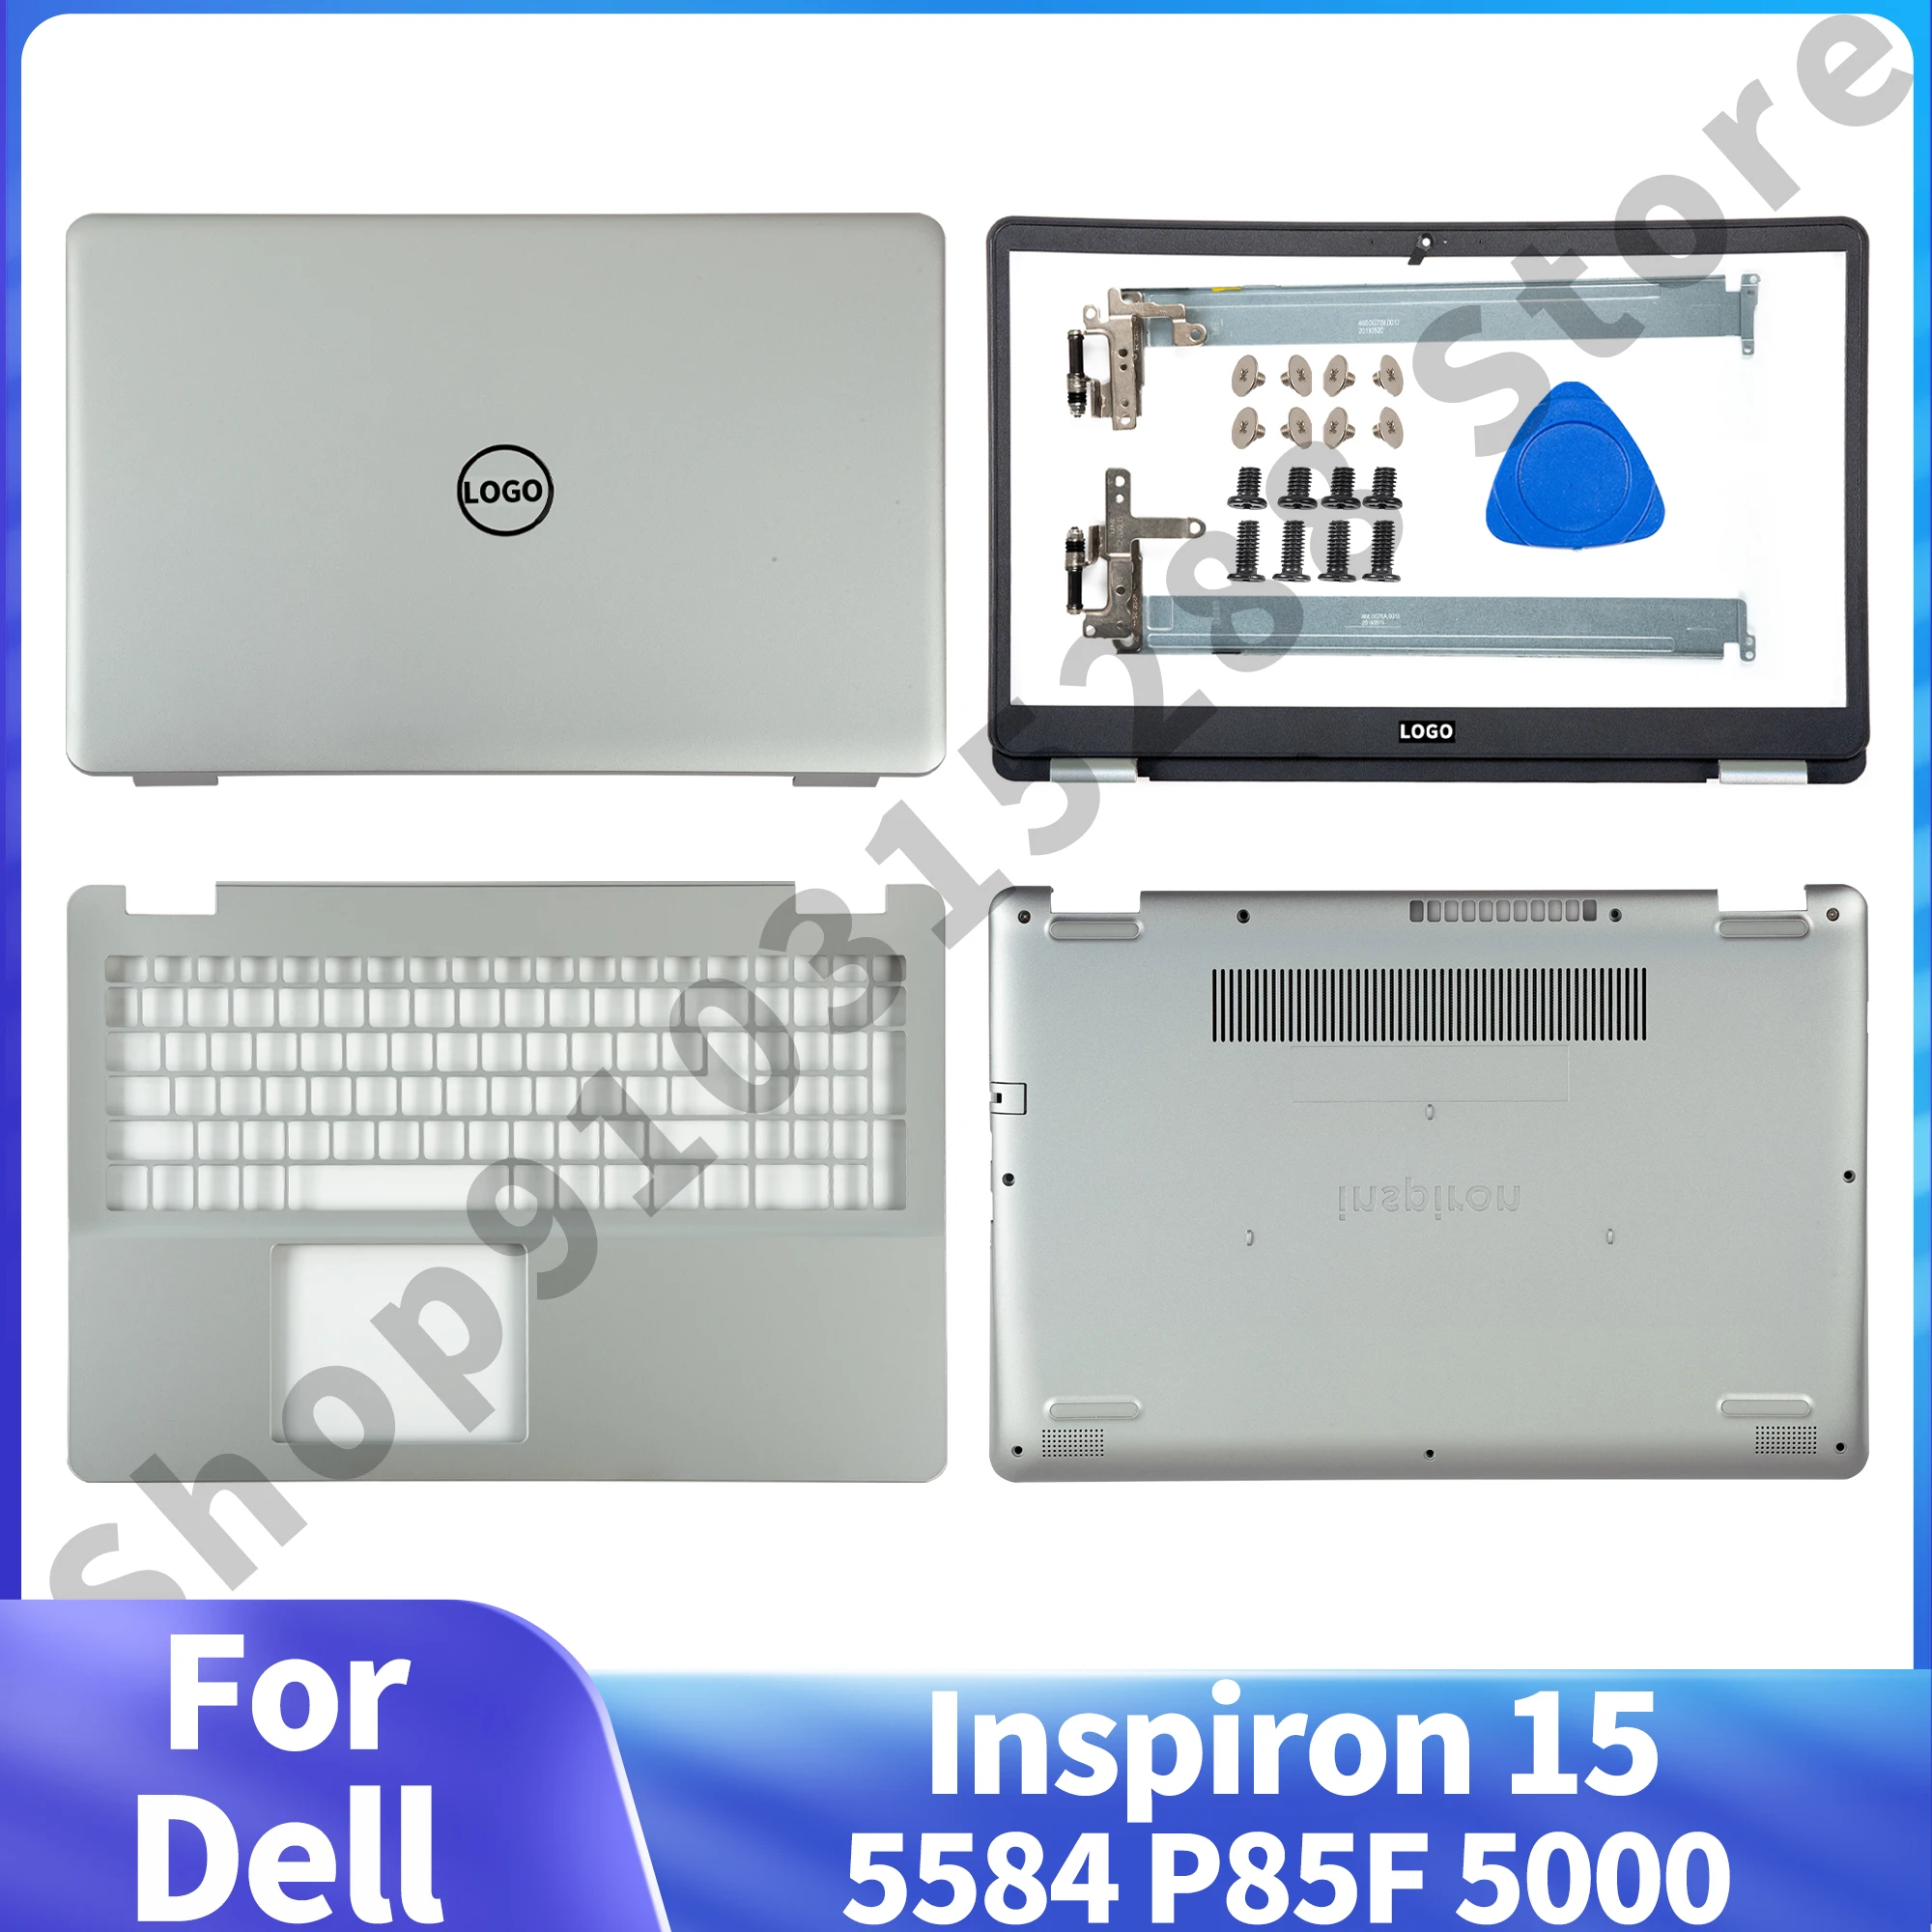 Laptop Parts For Dell Inspiron 15 5584 P85F 5000 New Rear Housing LCD Back Cover Front Bezel Palmrest Bottom Case Screws Free